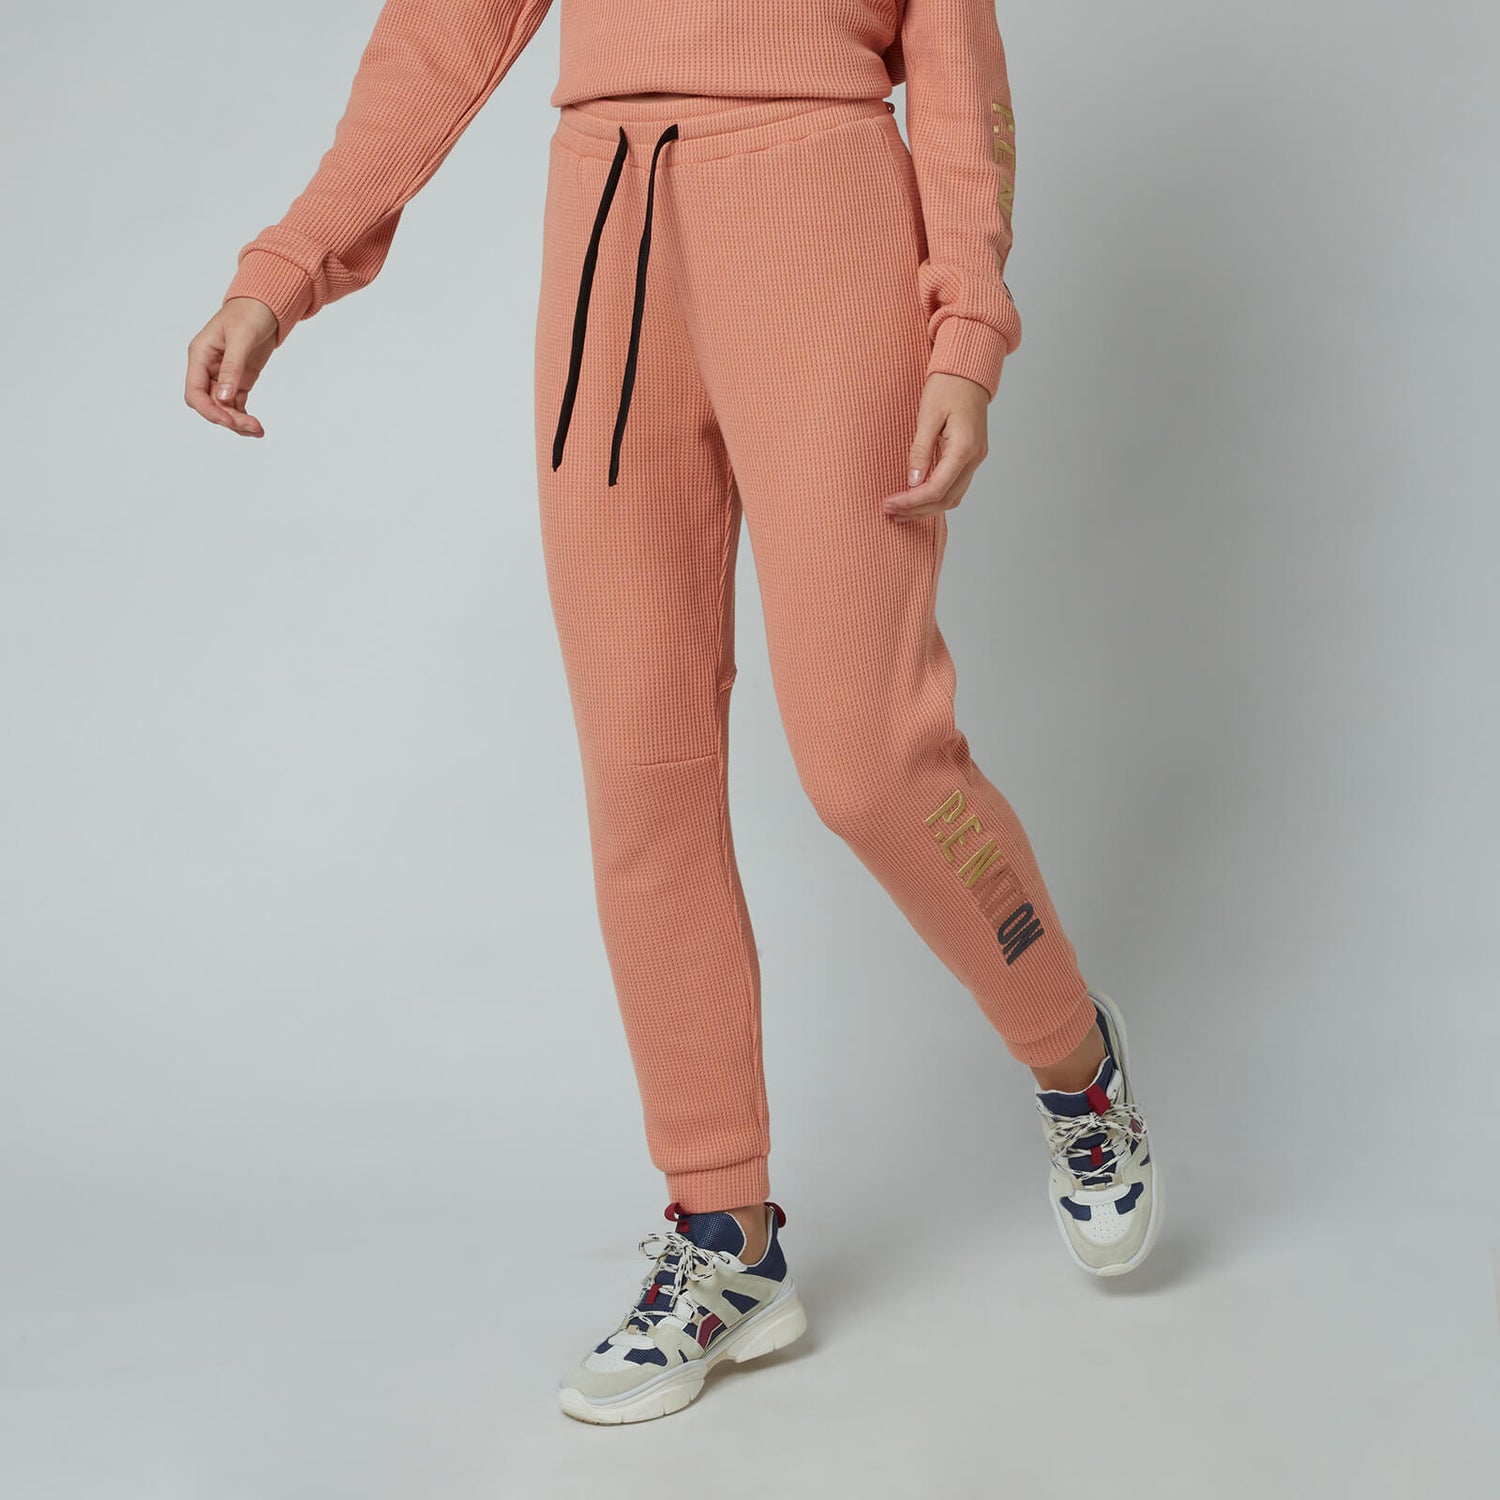 P.E Nation Women's Rebound Trackpants - Coral Mid Crom - XS